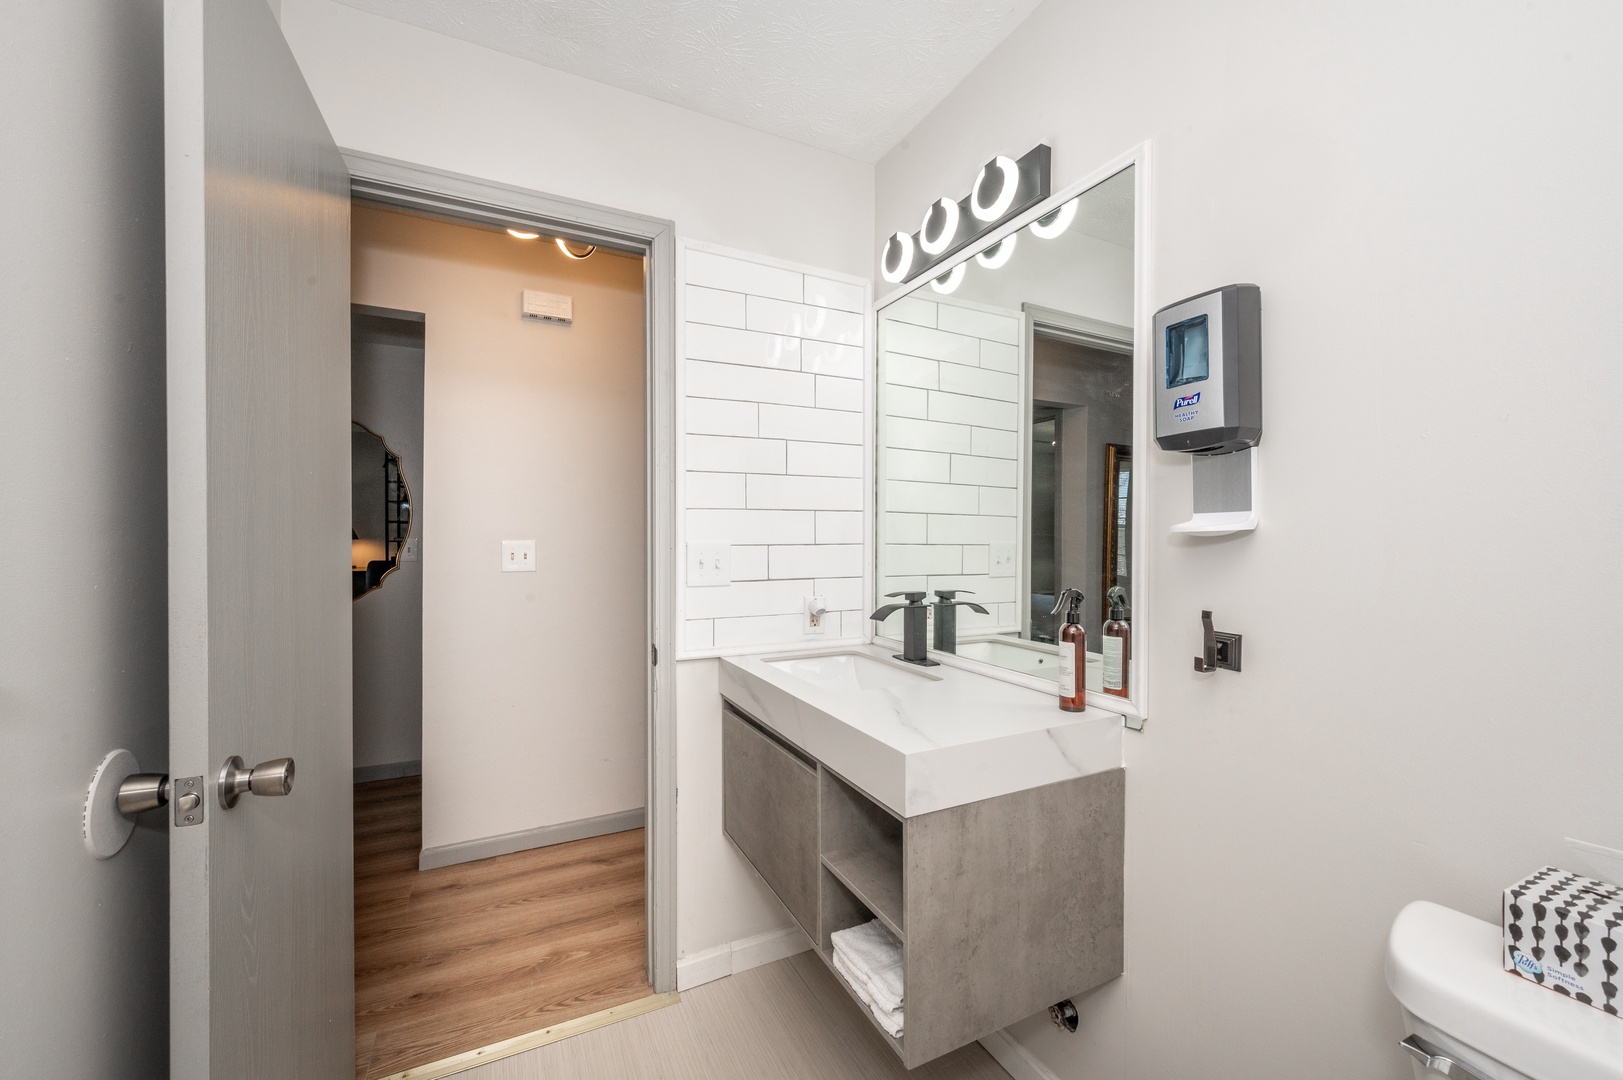 The full bathroom in Apartment 1 features a single vanity & shower/tub combo